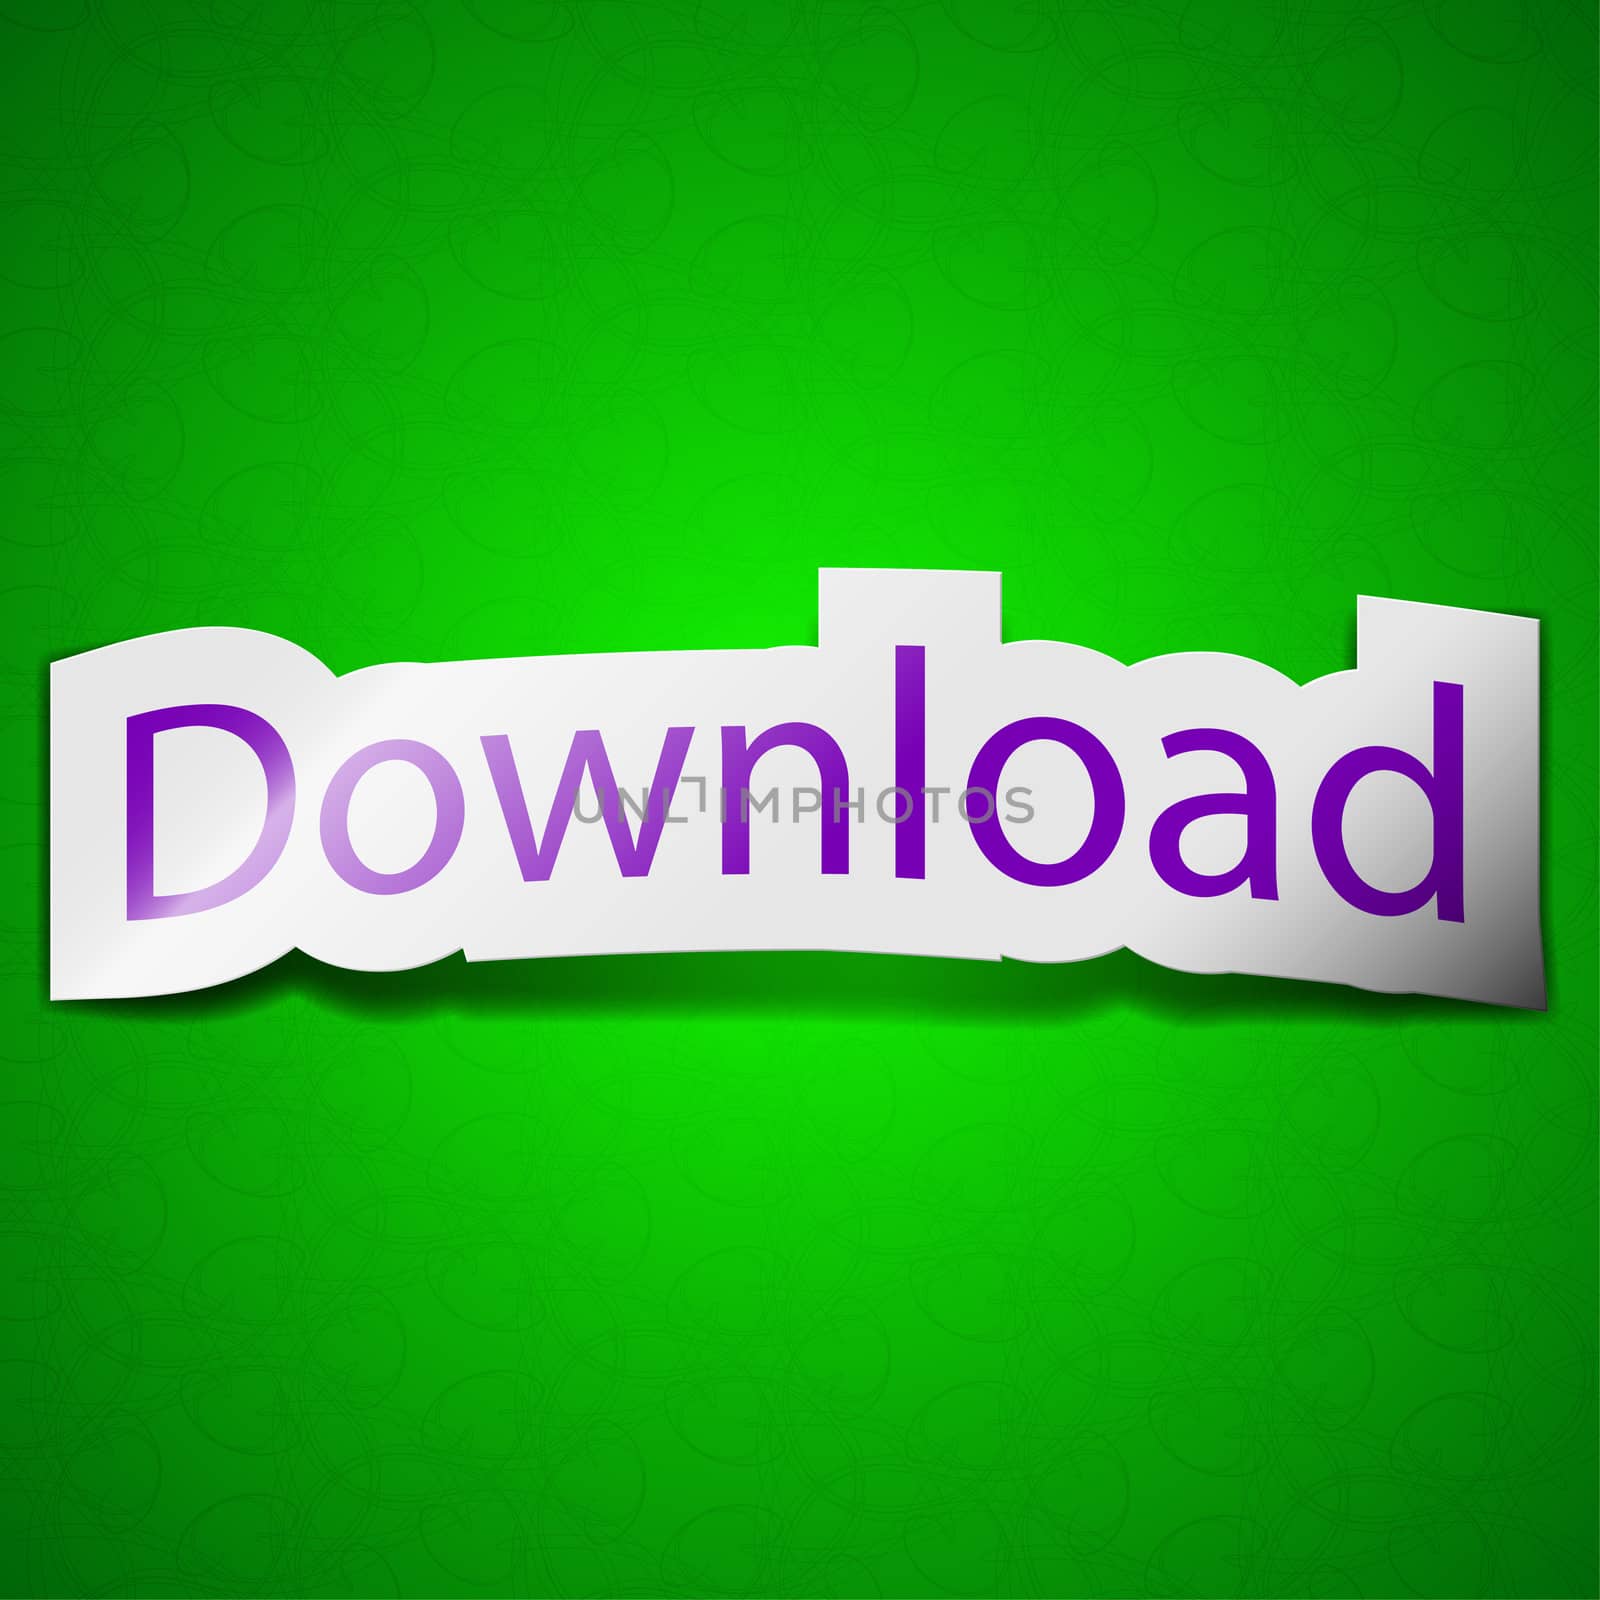 Download now icon sign. Symbol chic colored sticky label on green background.  illustration